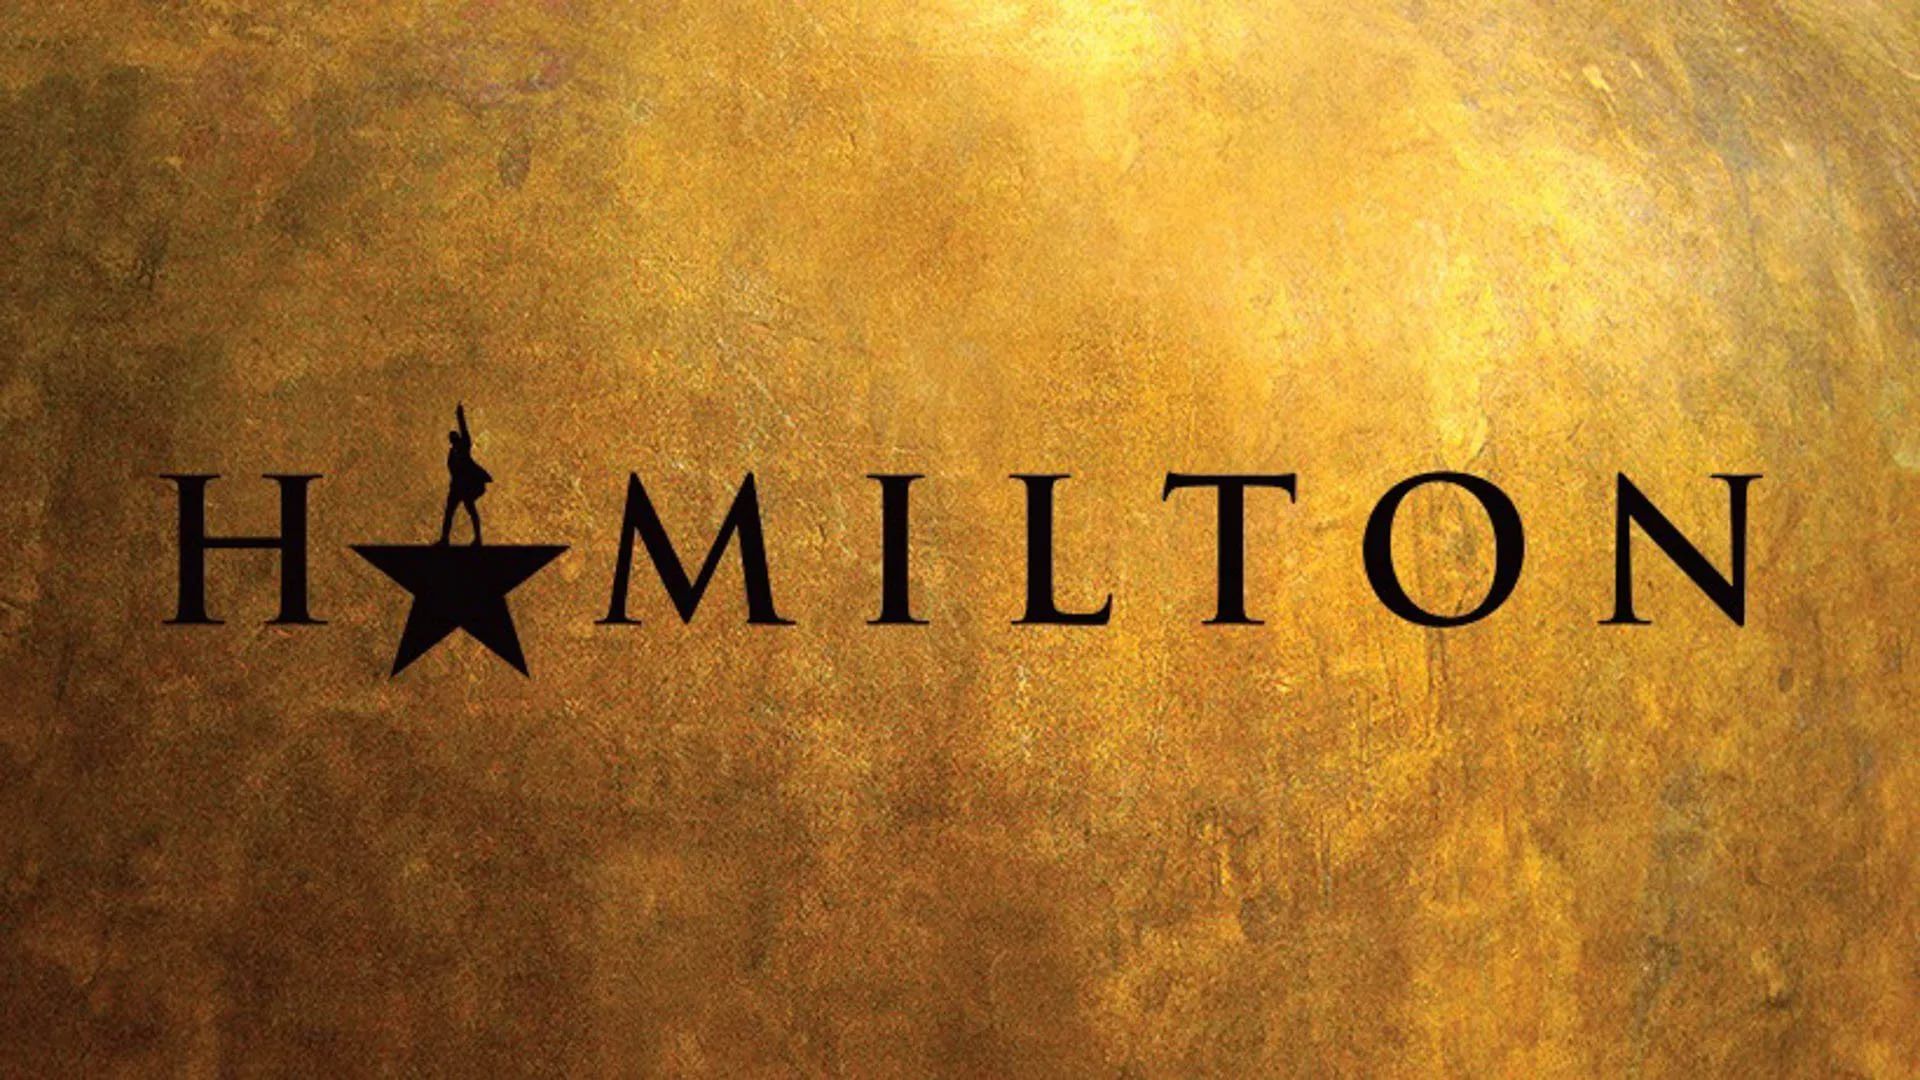 Hamilton spelled out with gold background 